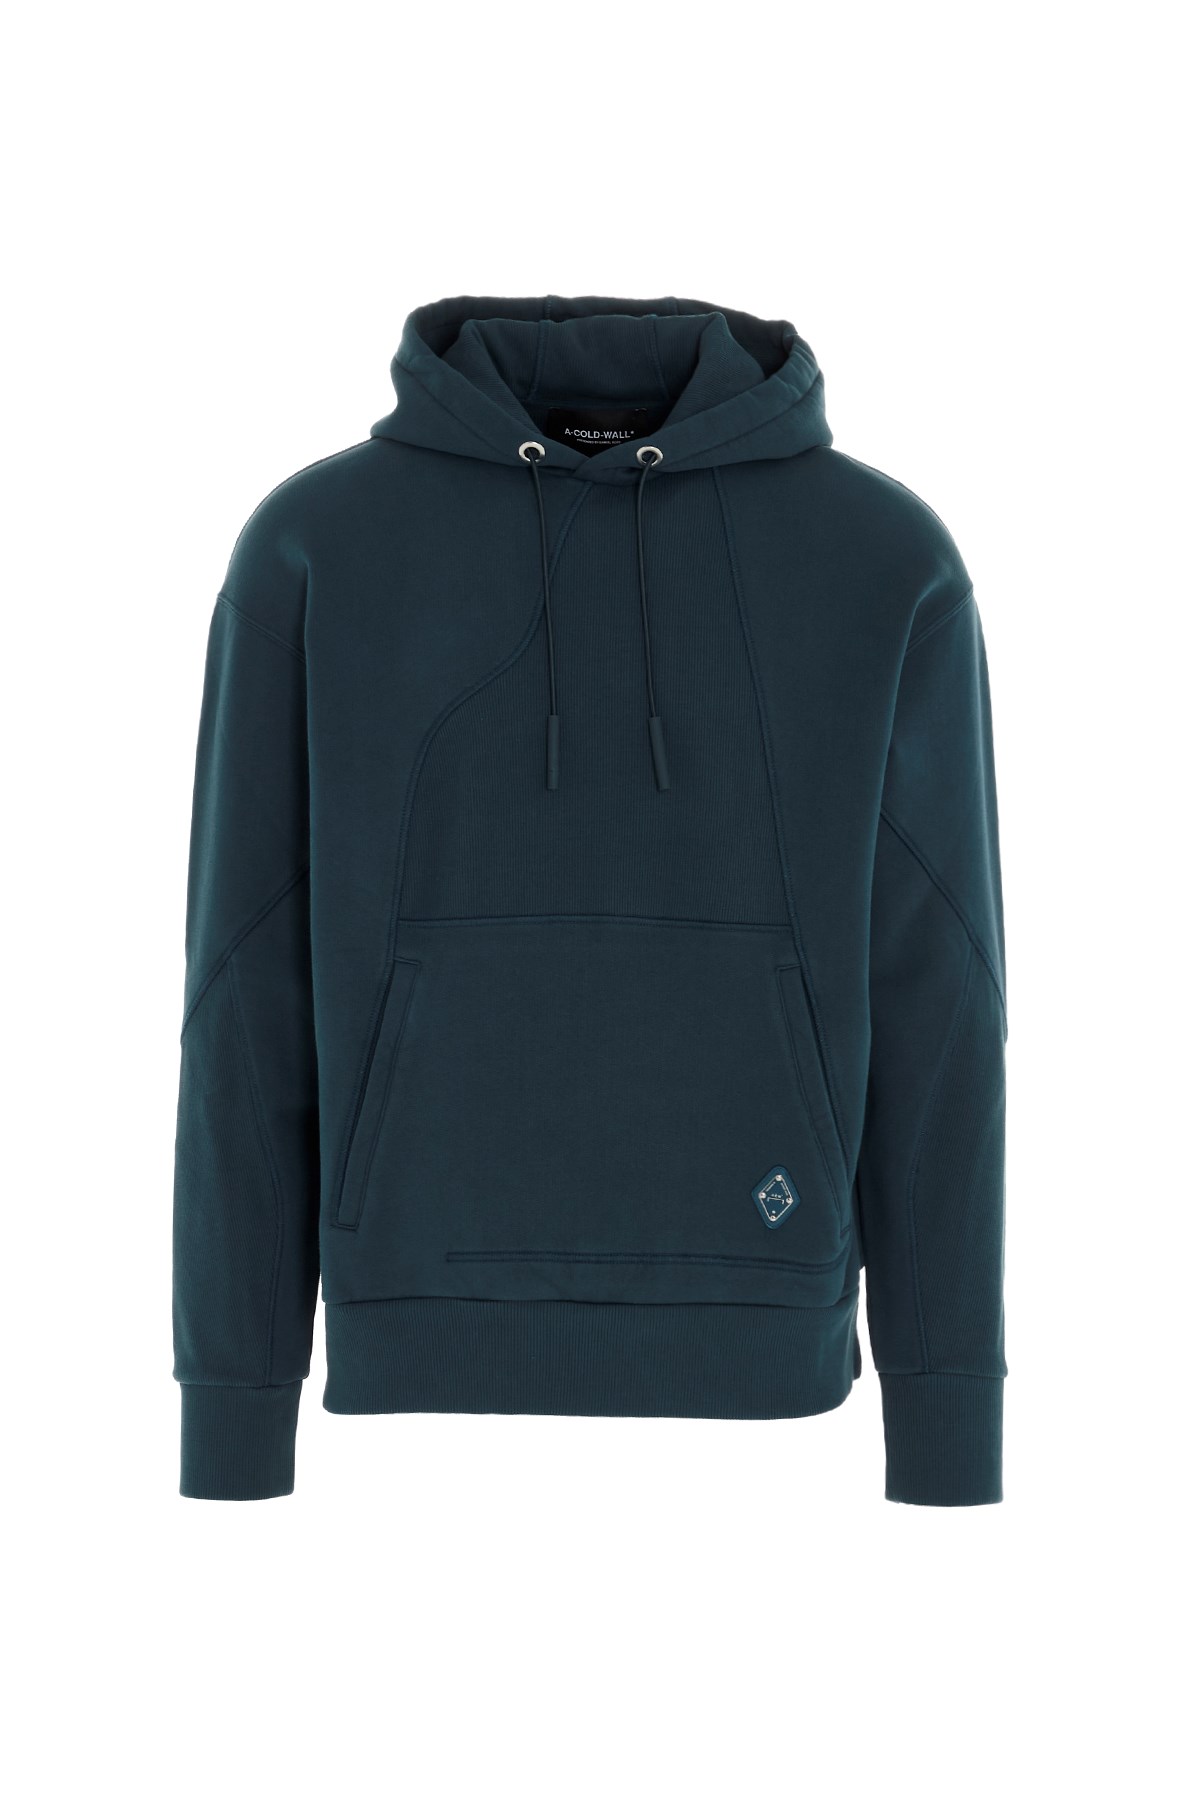 A-COLD-WALL* Logo Hoodie